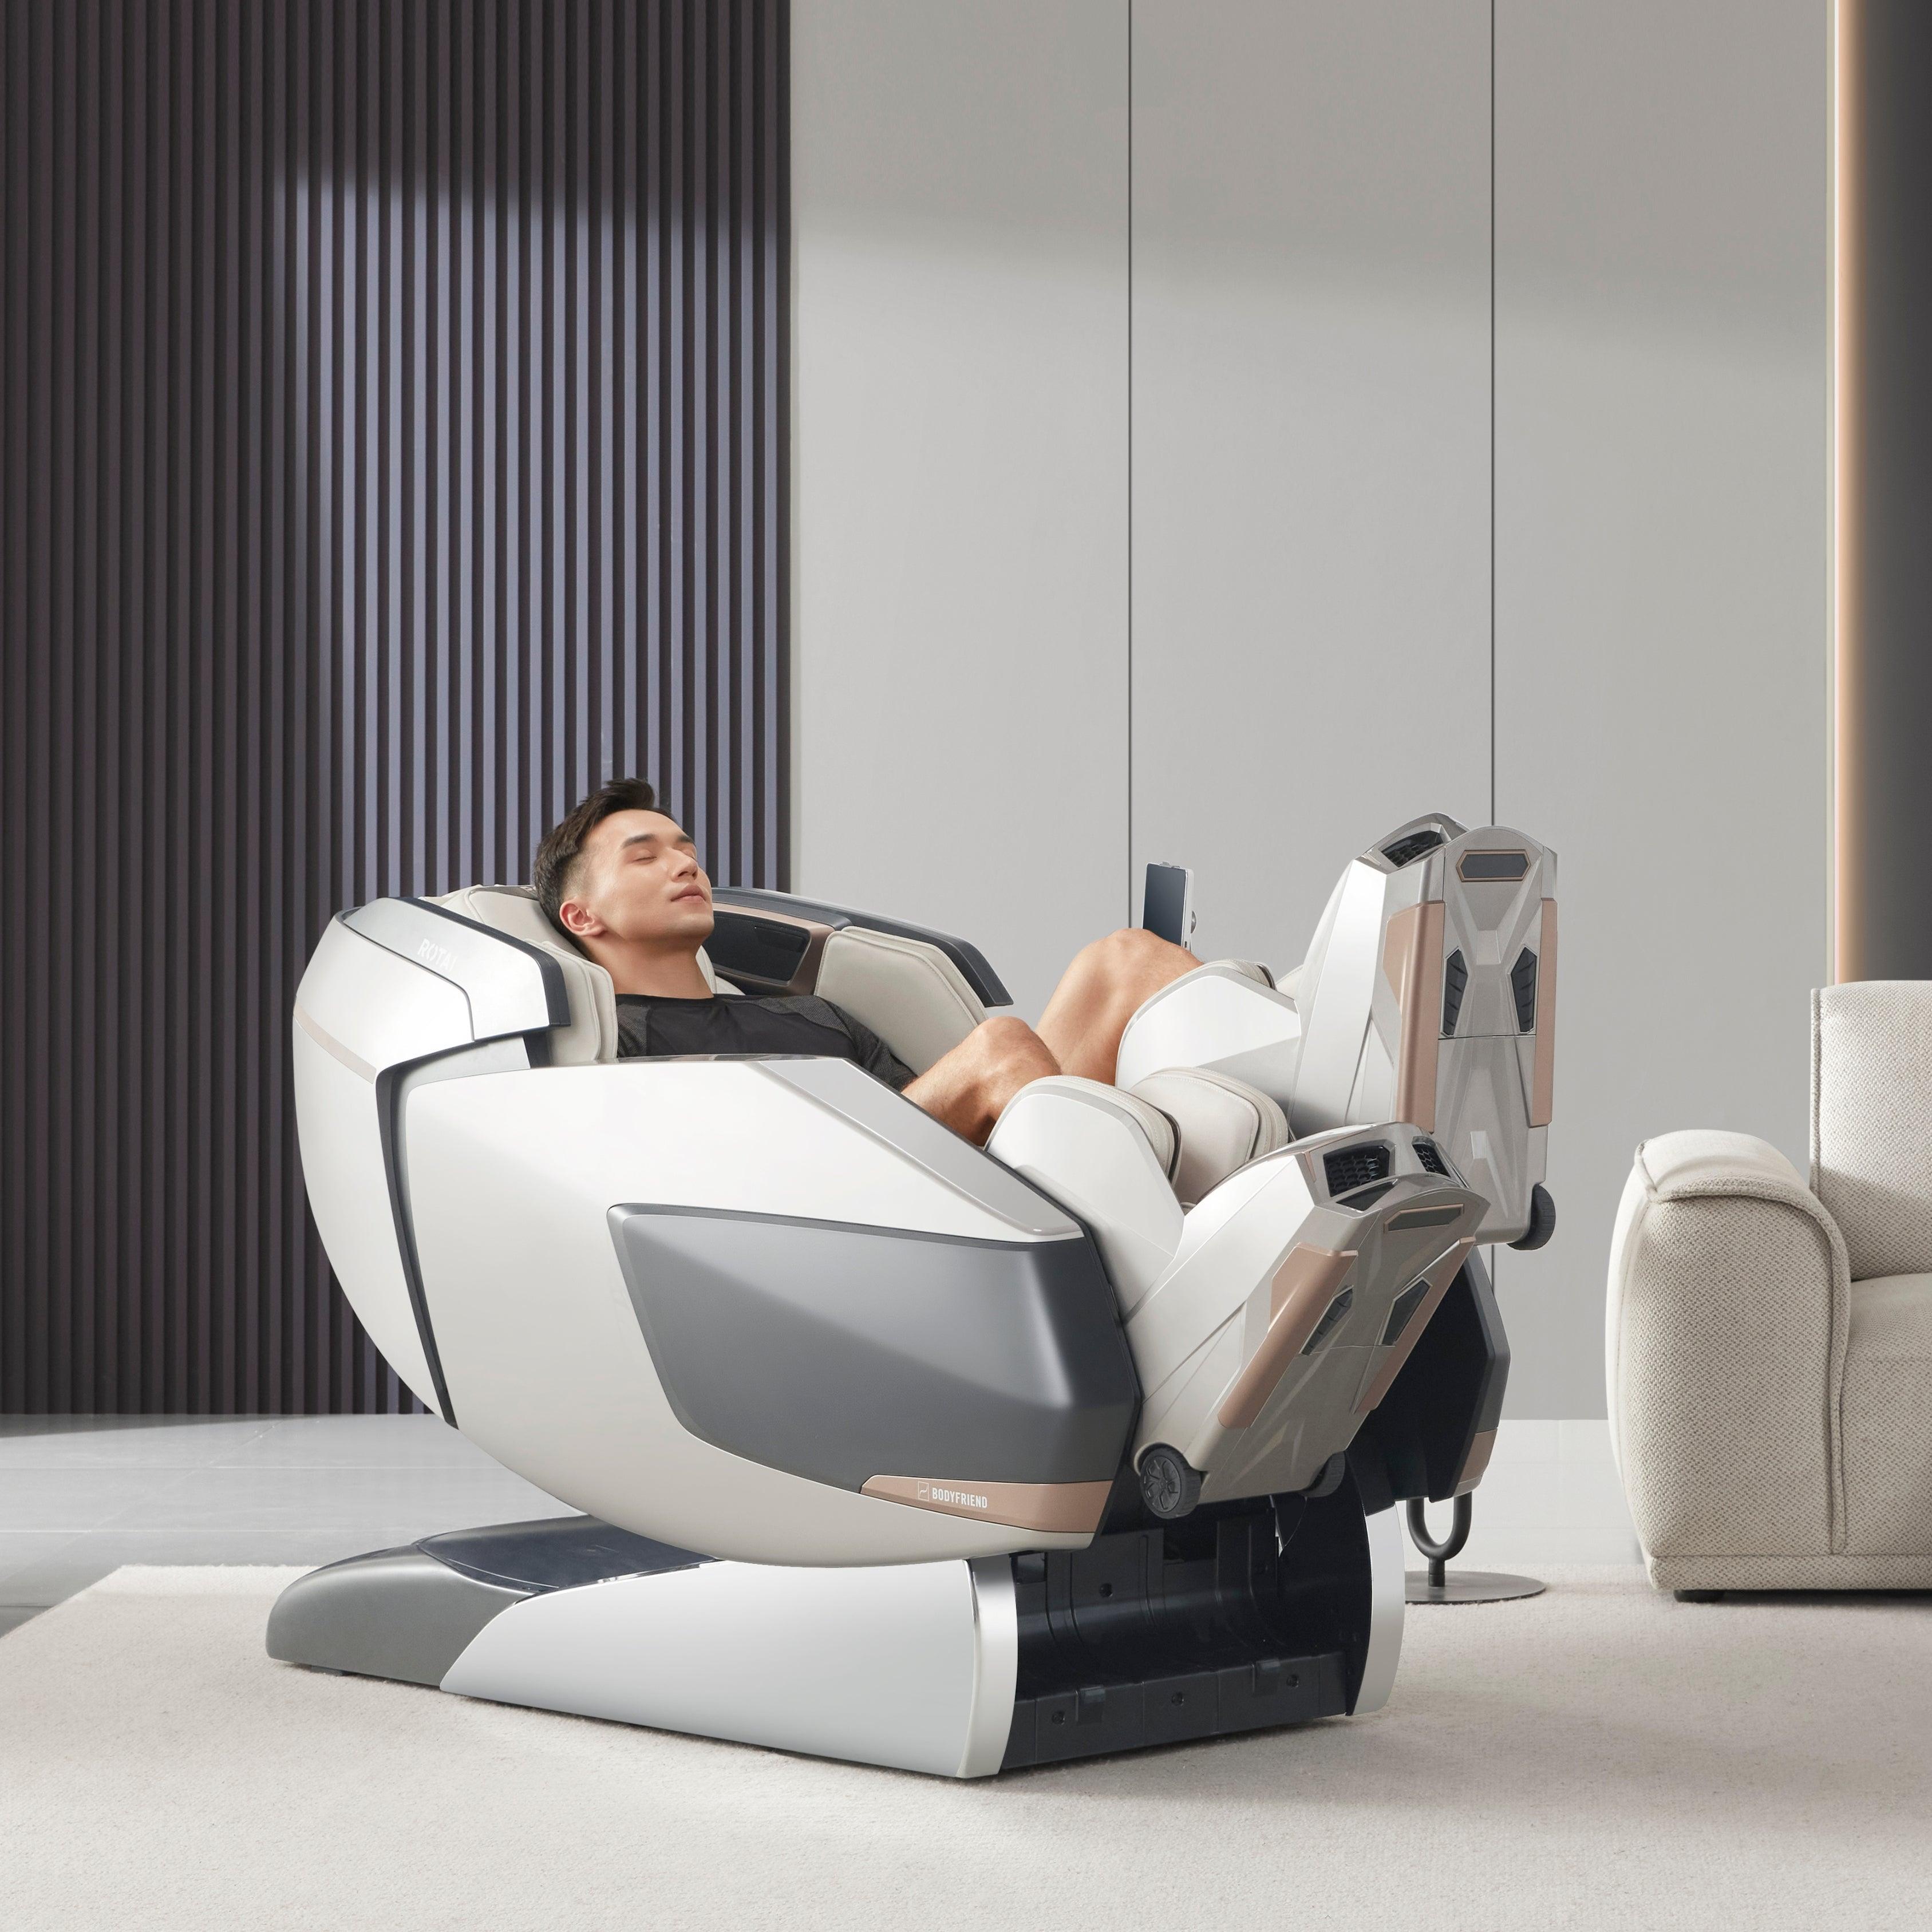 AI Robotic Massage Chair in Glacier Silver with Rovo Walking Technology, best massage chair in UAE, Dubai, enhancing lower body flexibility and circulation